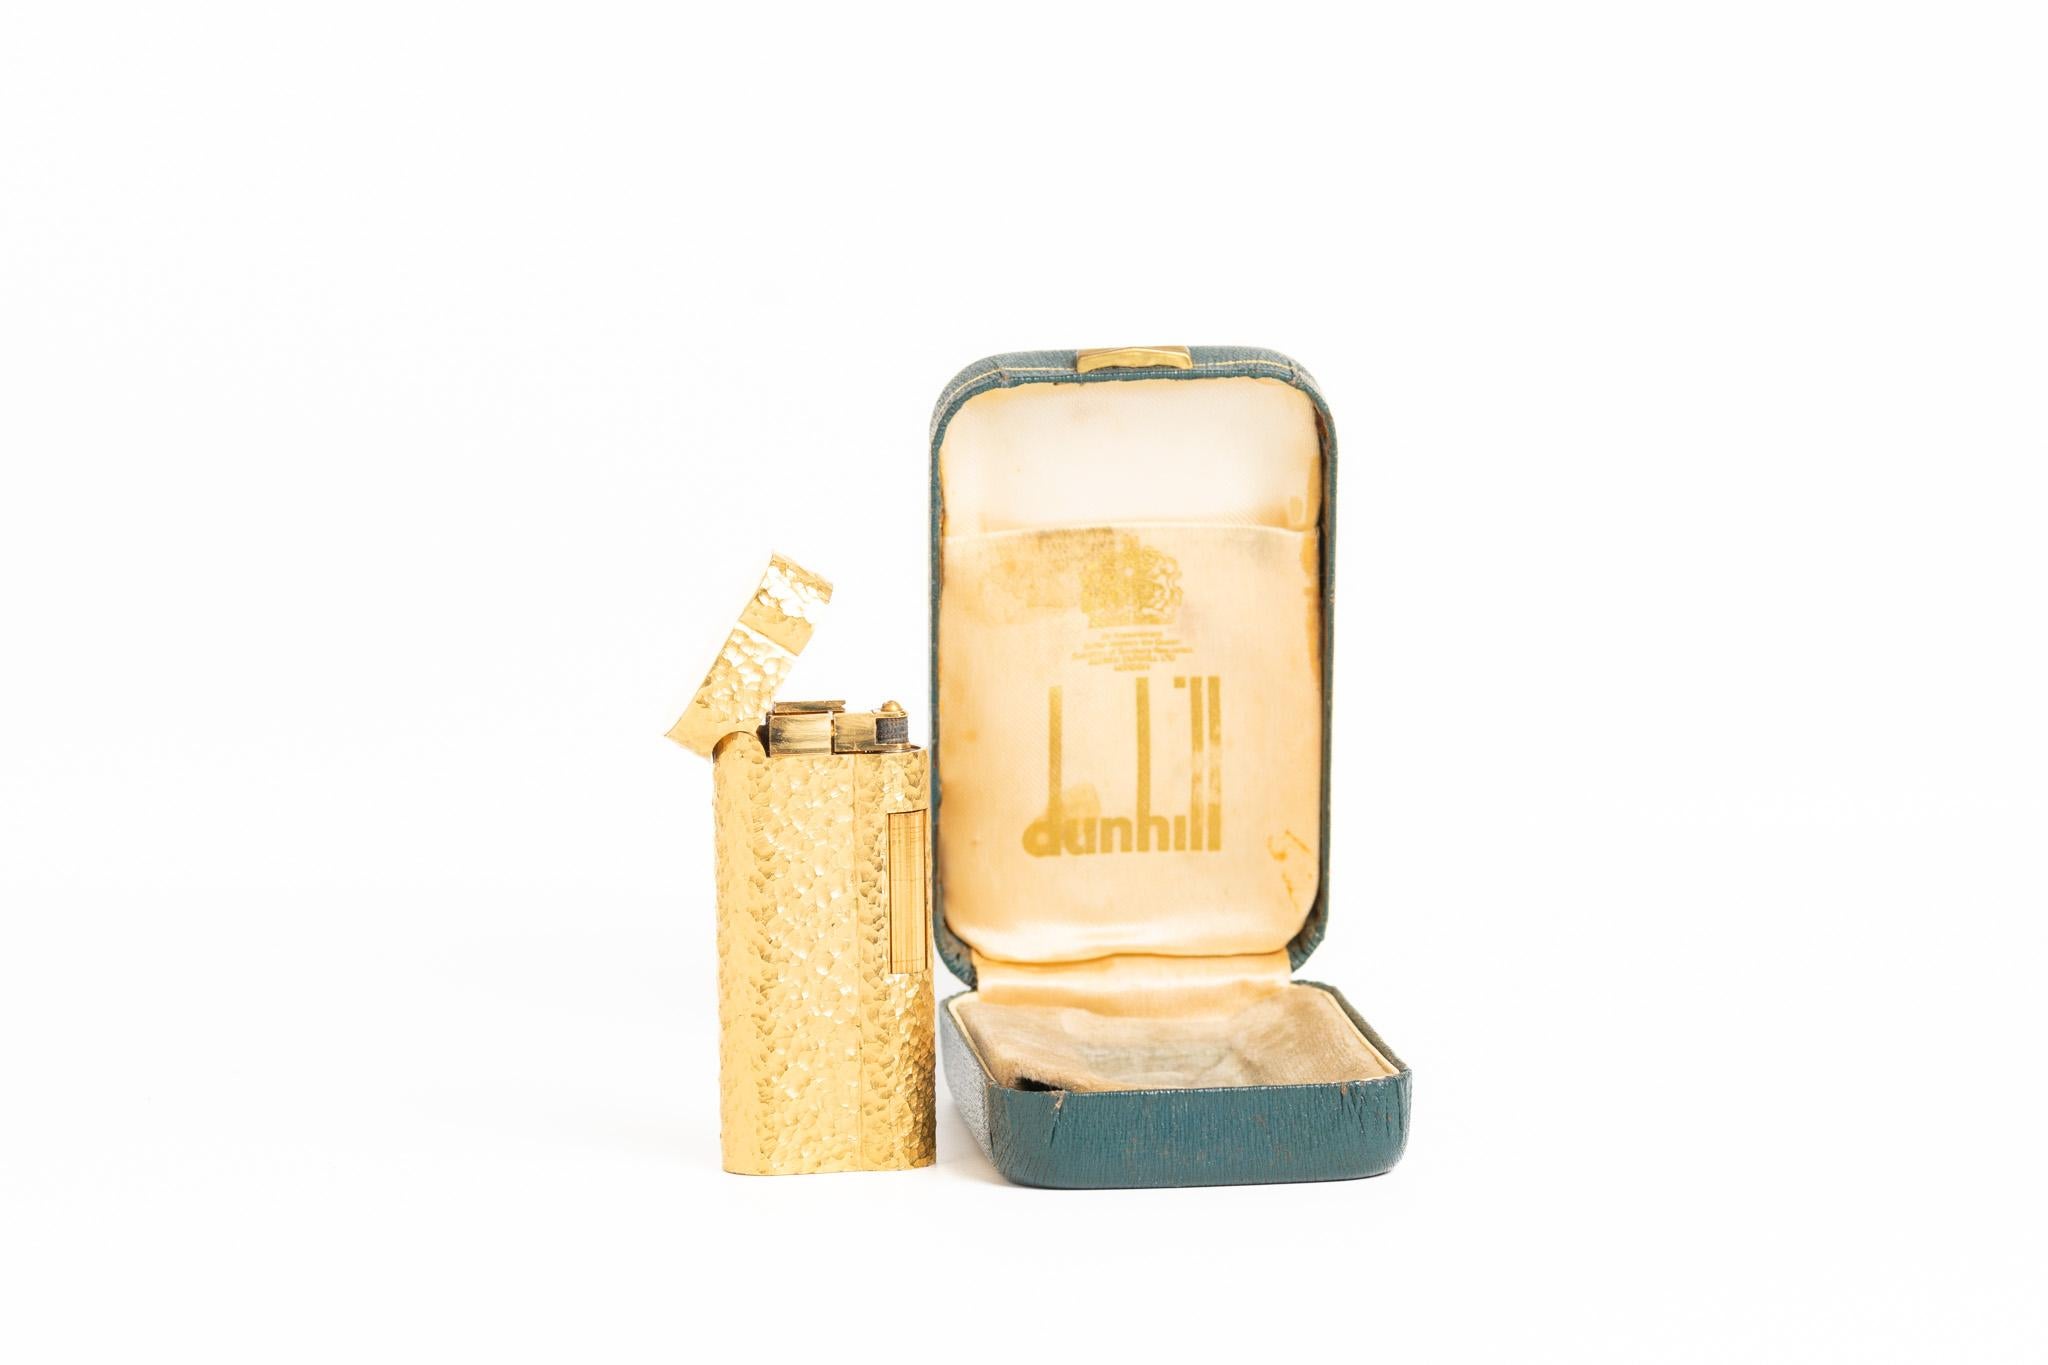 Rare and iconic Dunhill S Type 'Rollagas' Lighter, circa 1980 with an original blue box. The lighter has a beautiful hammered design and features 20 microns gold plate. Stamped on the bottom, with a serial number: D40998. The lighter comes with a